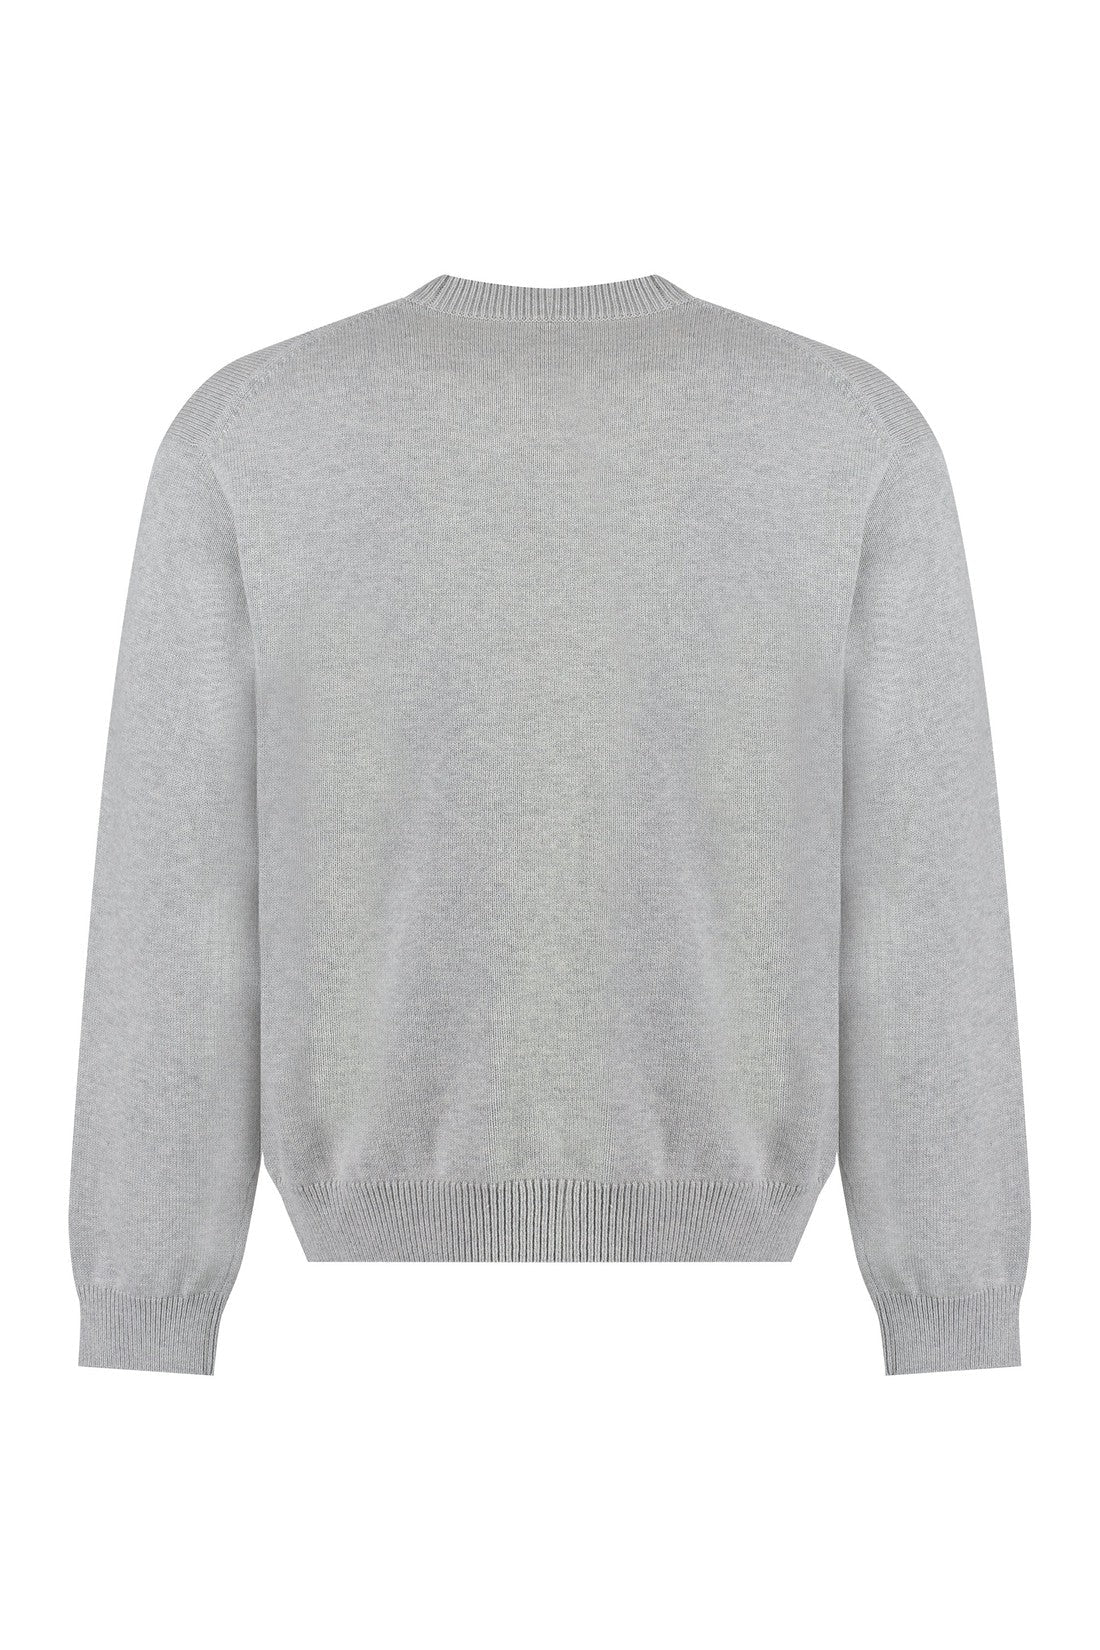 Kenzo-OUTLET-SALE-Wool-blend crew-neck sweater-ARCHIVIST